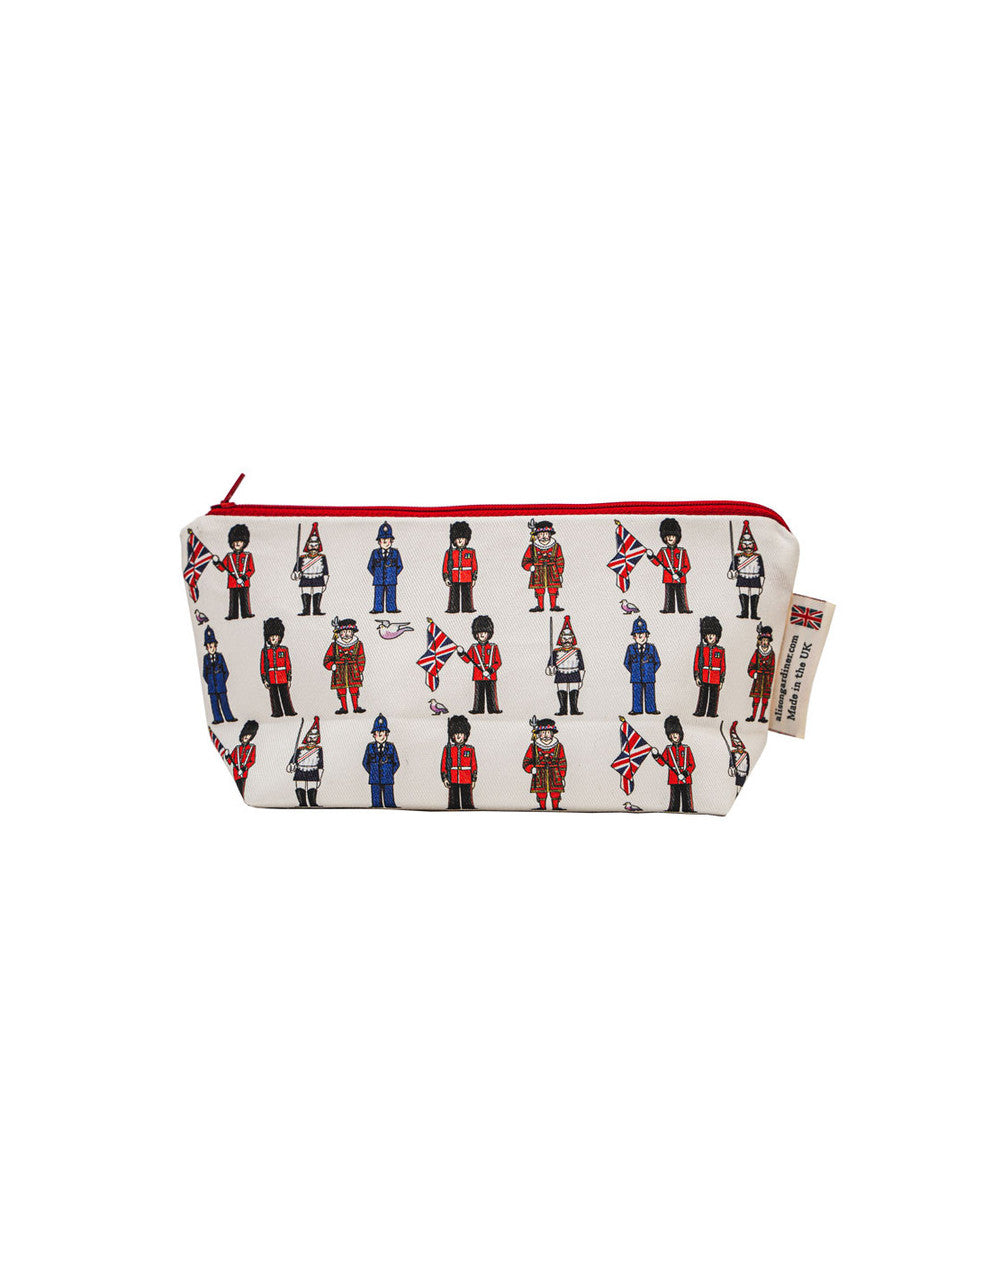 London Figures cosmetic bag/pencil case from Alison Gardiner.